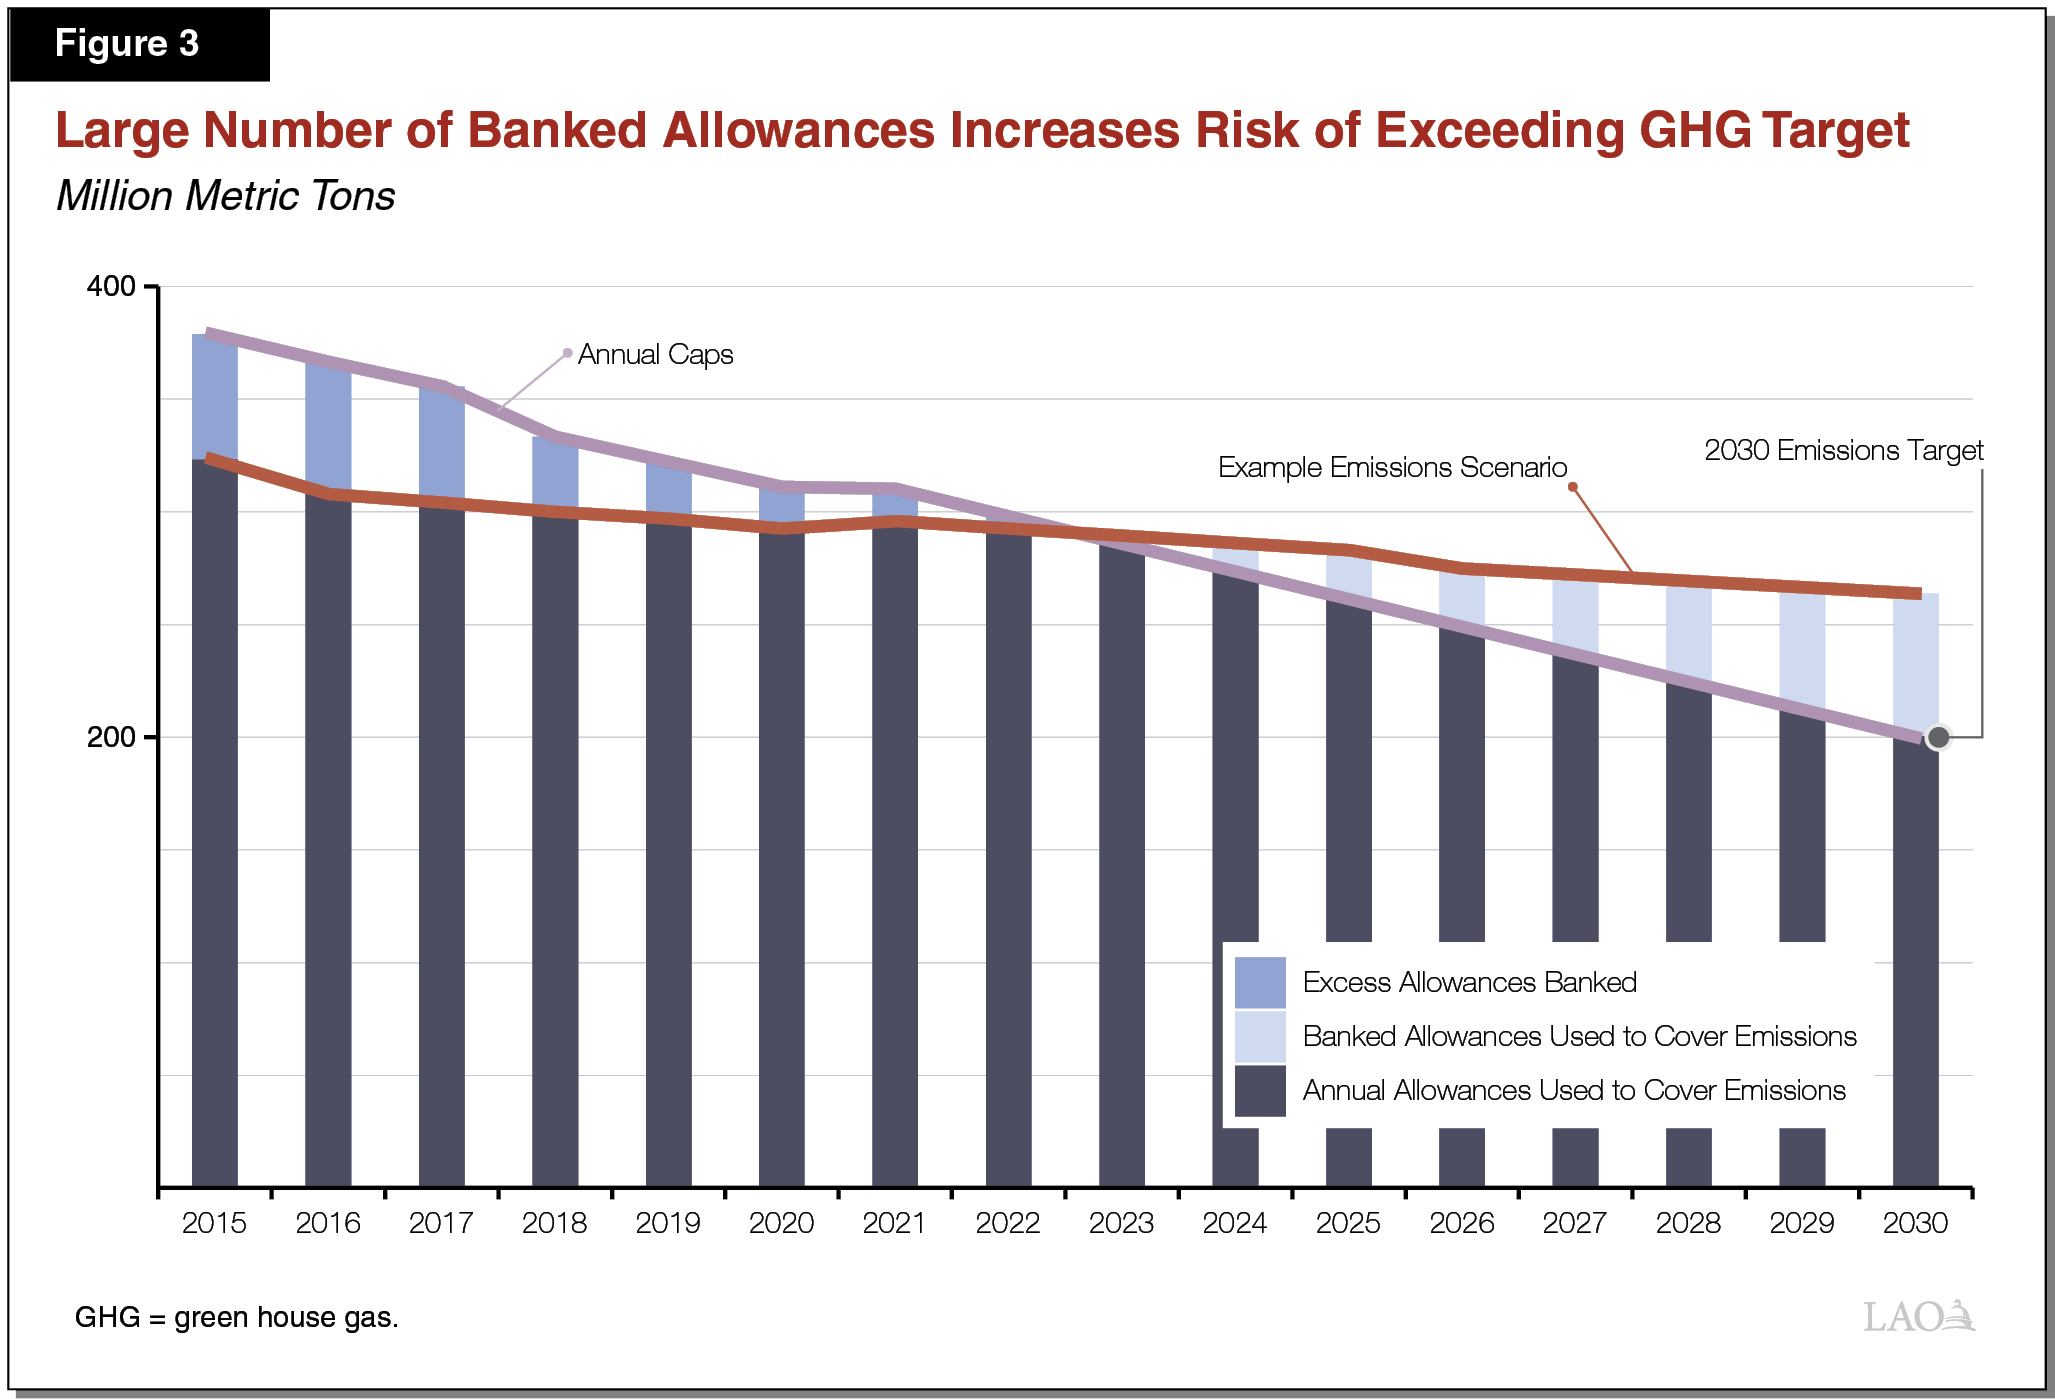 Figure 3 - Large Number of Banked Allowances Increases Risk of Exceeding GHG Target